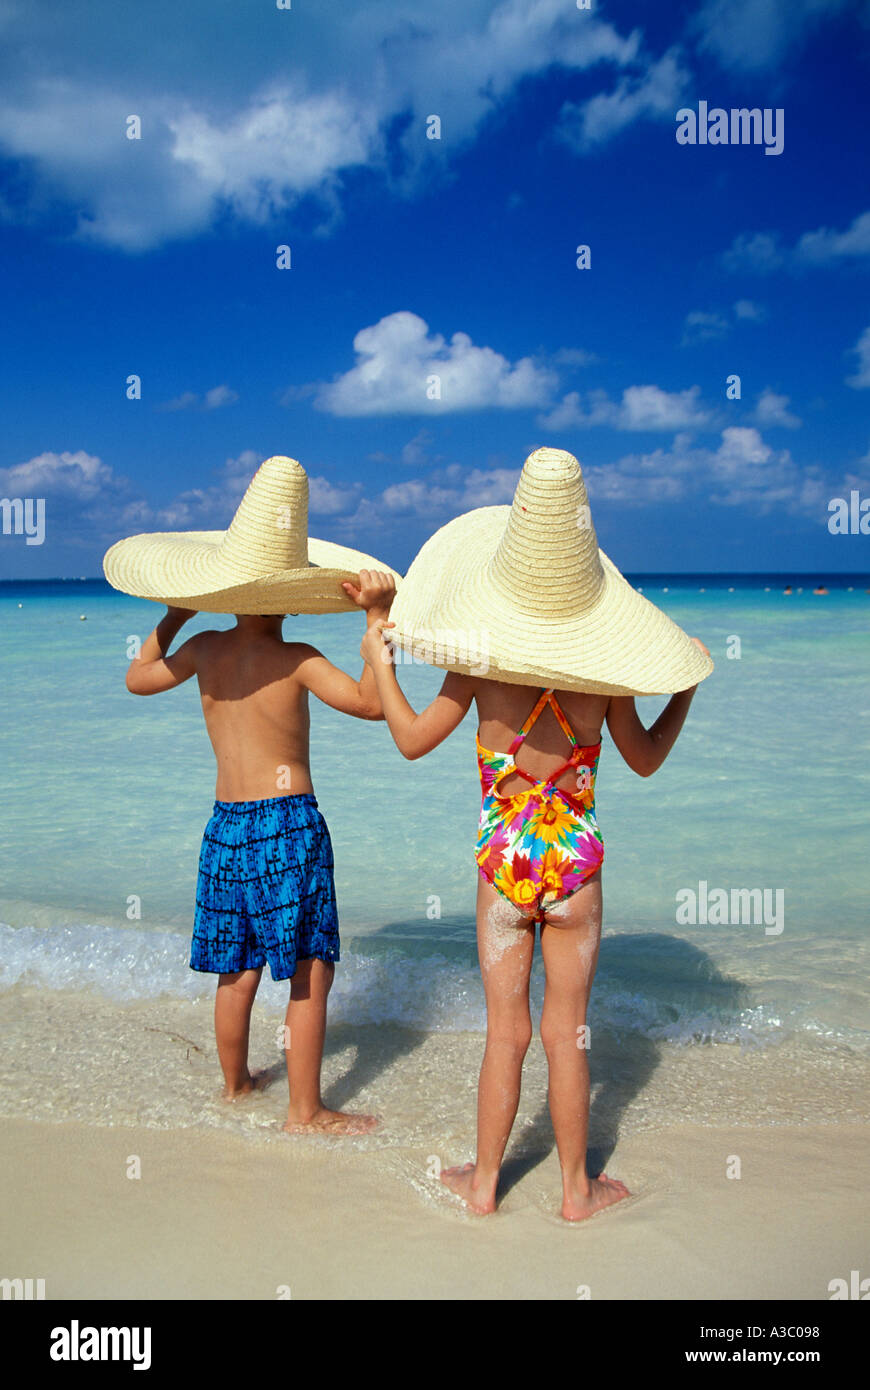 Children in Mexican hats on beach 7 yrs old Stock Photo